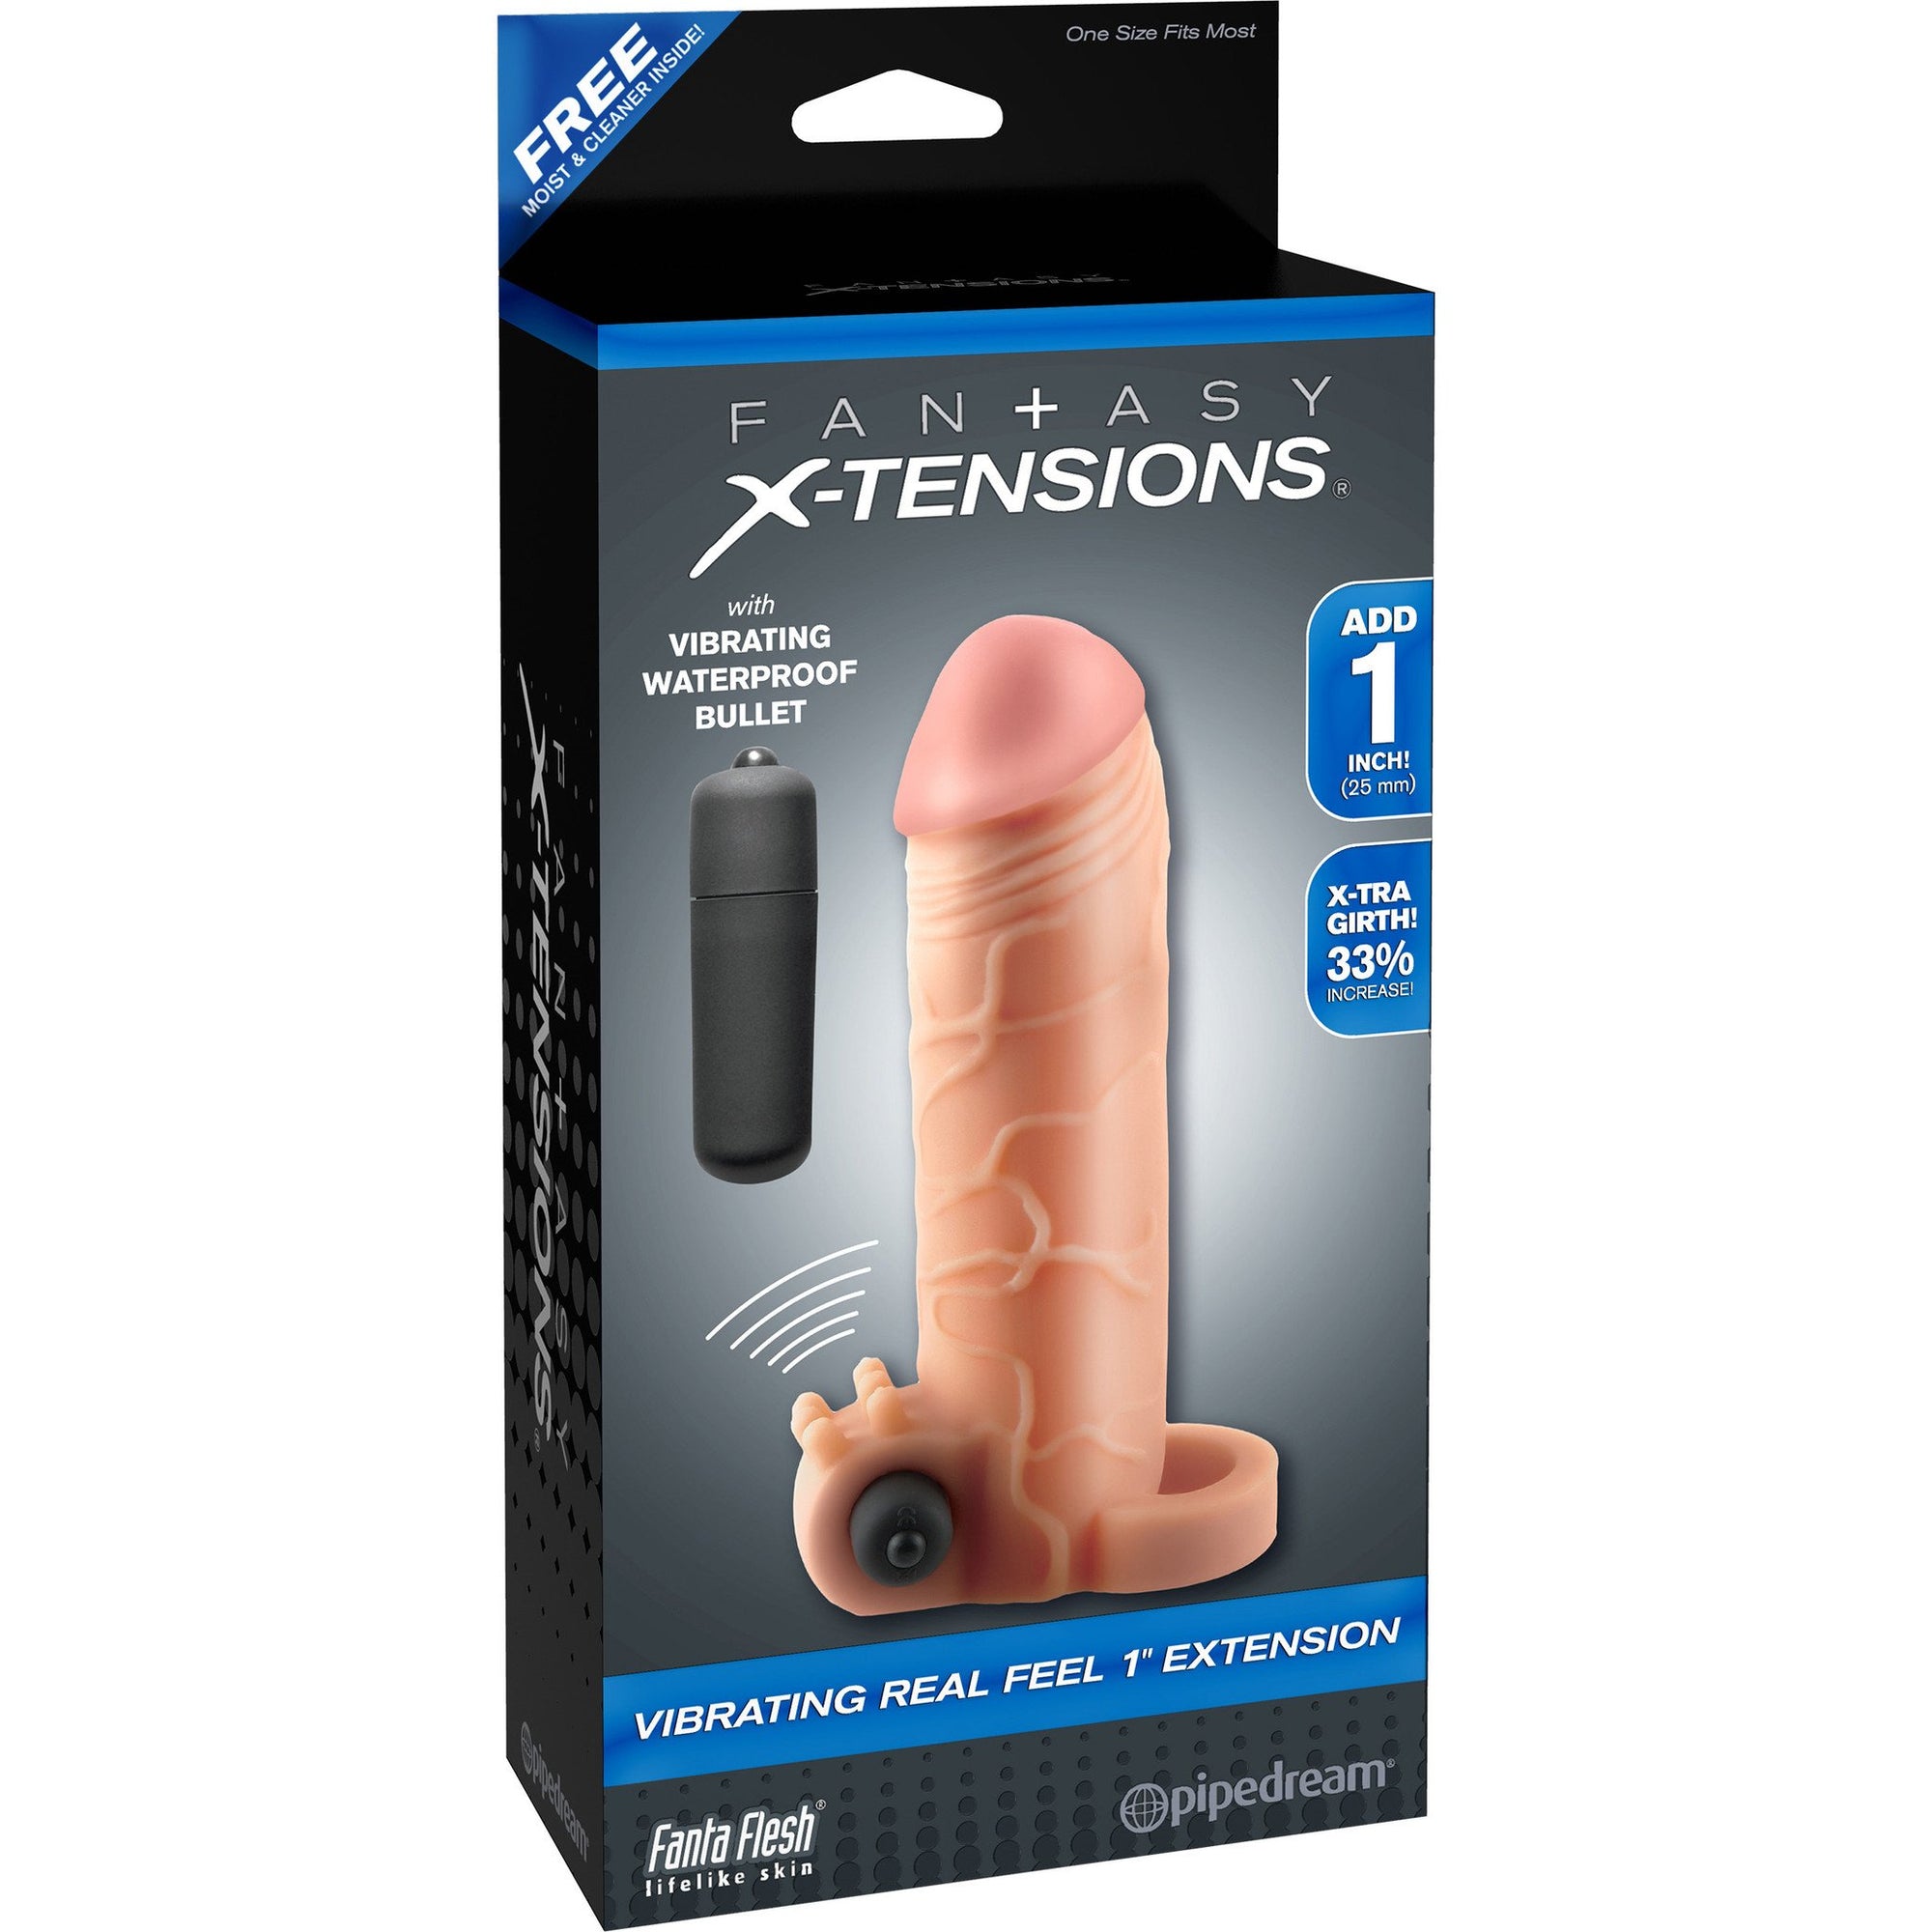 Pipedream - Fantasy X-tensions Vibrating Real Feel Extension 1" - PleasureHobby